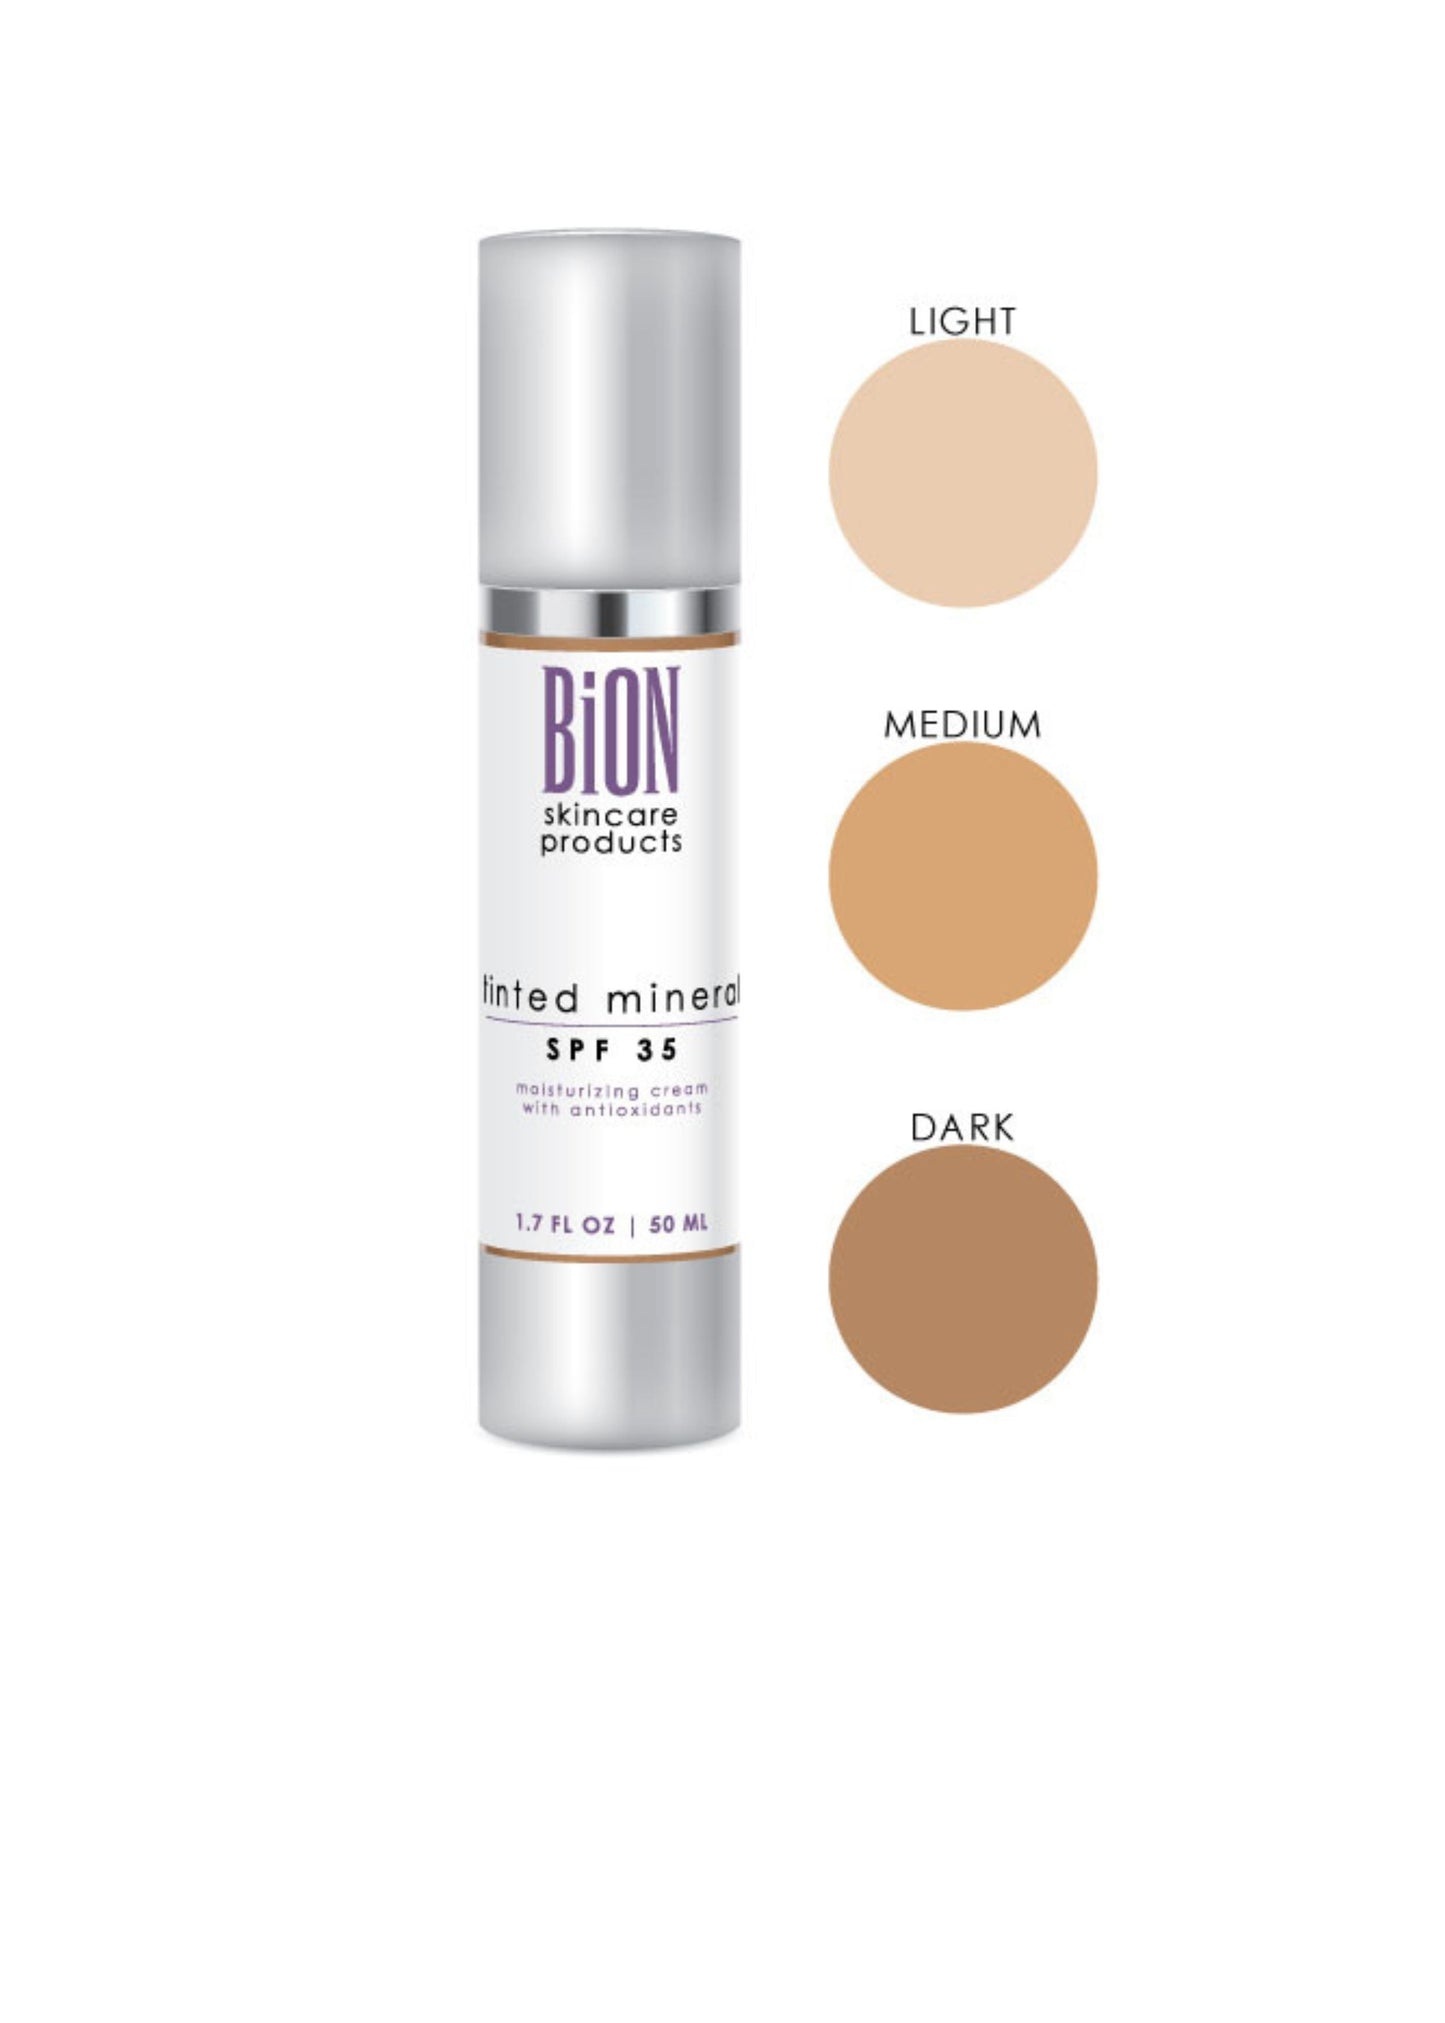 Bion Tinted Mineral SPF35